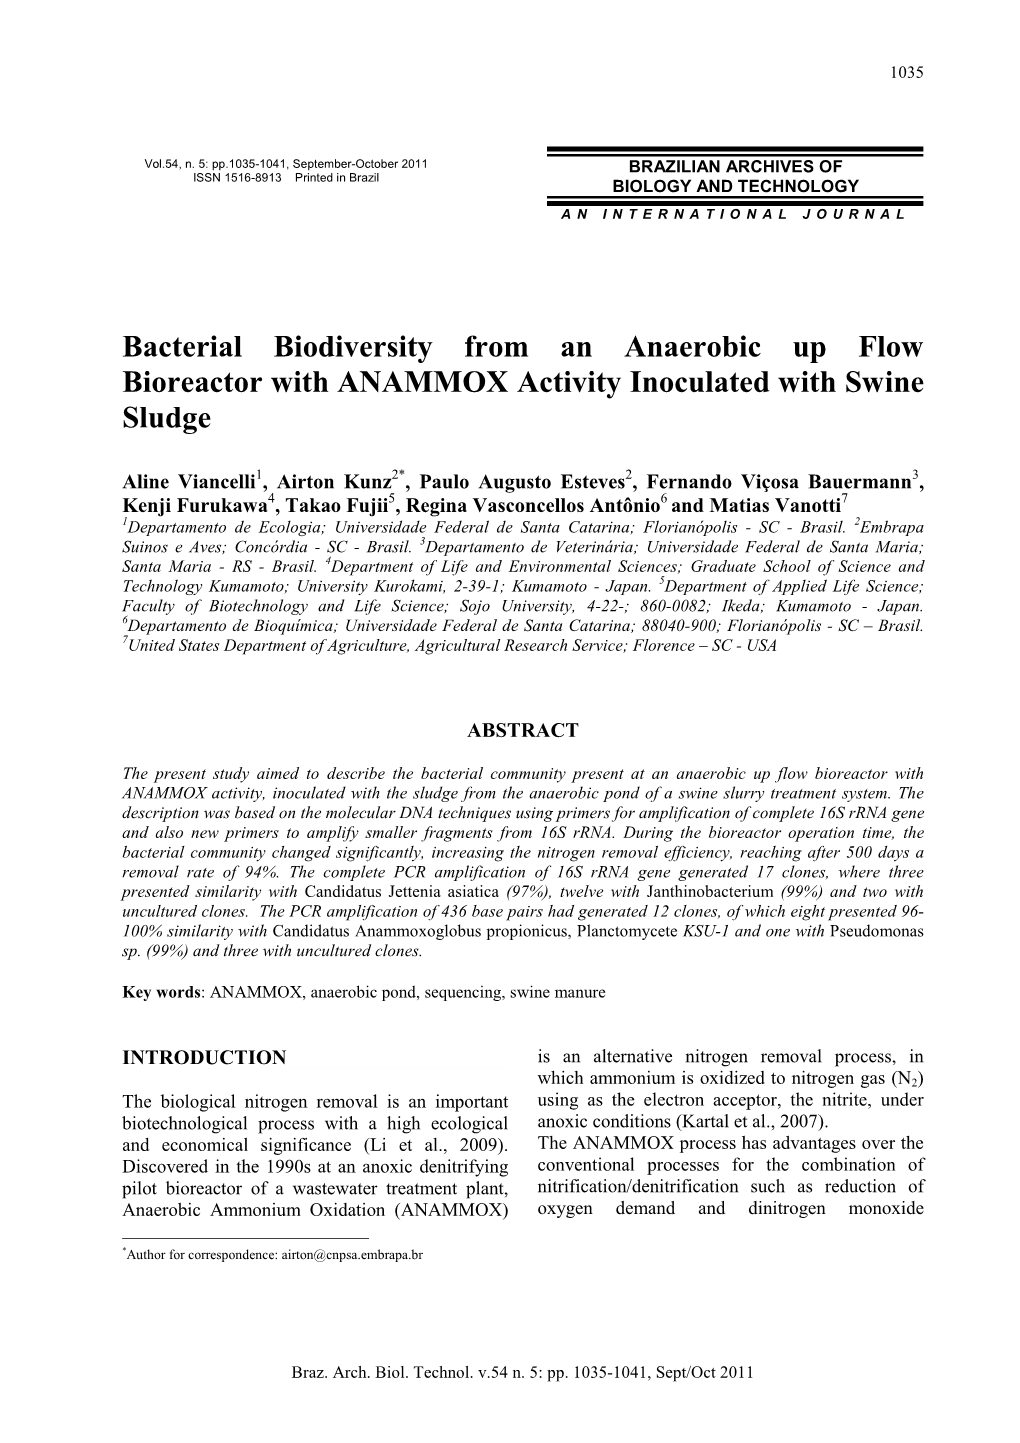 Bacterial Biodiversity from an Anaerobic up Flow Bioreactor with ANAMMOX Activity Inoculated with Swine Sludge